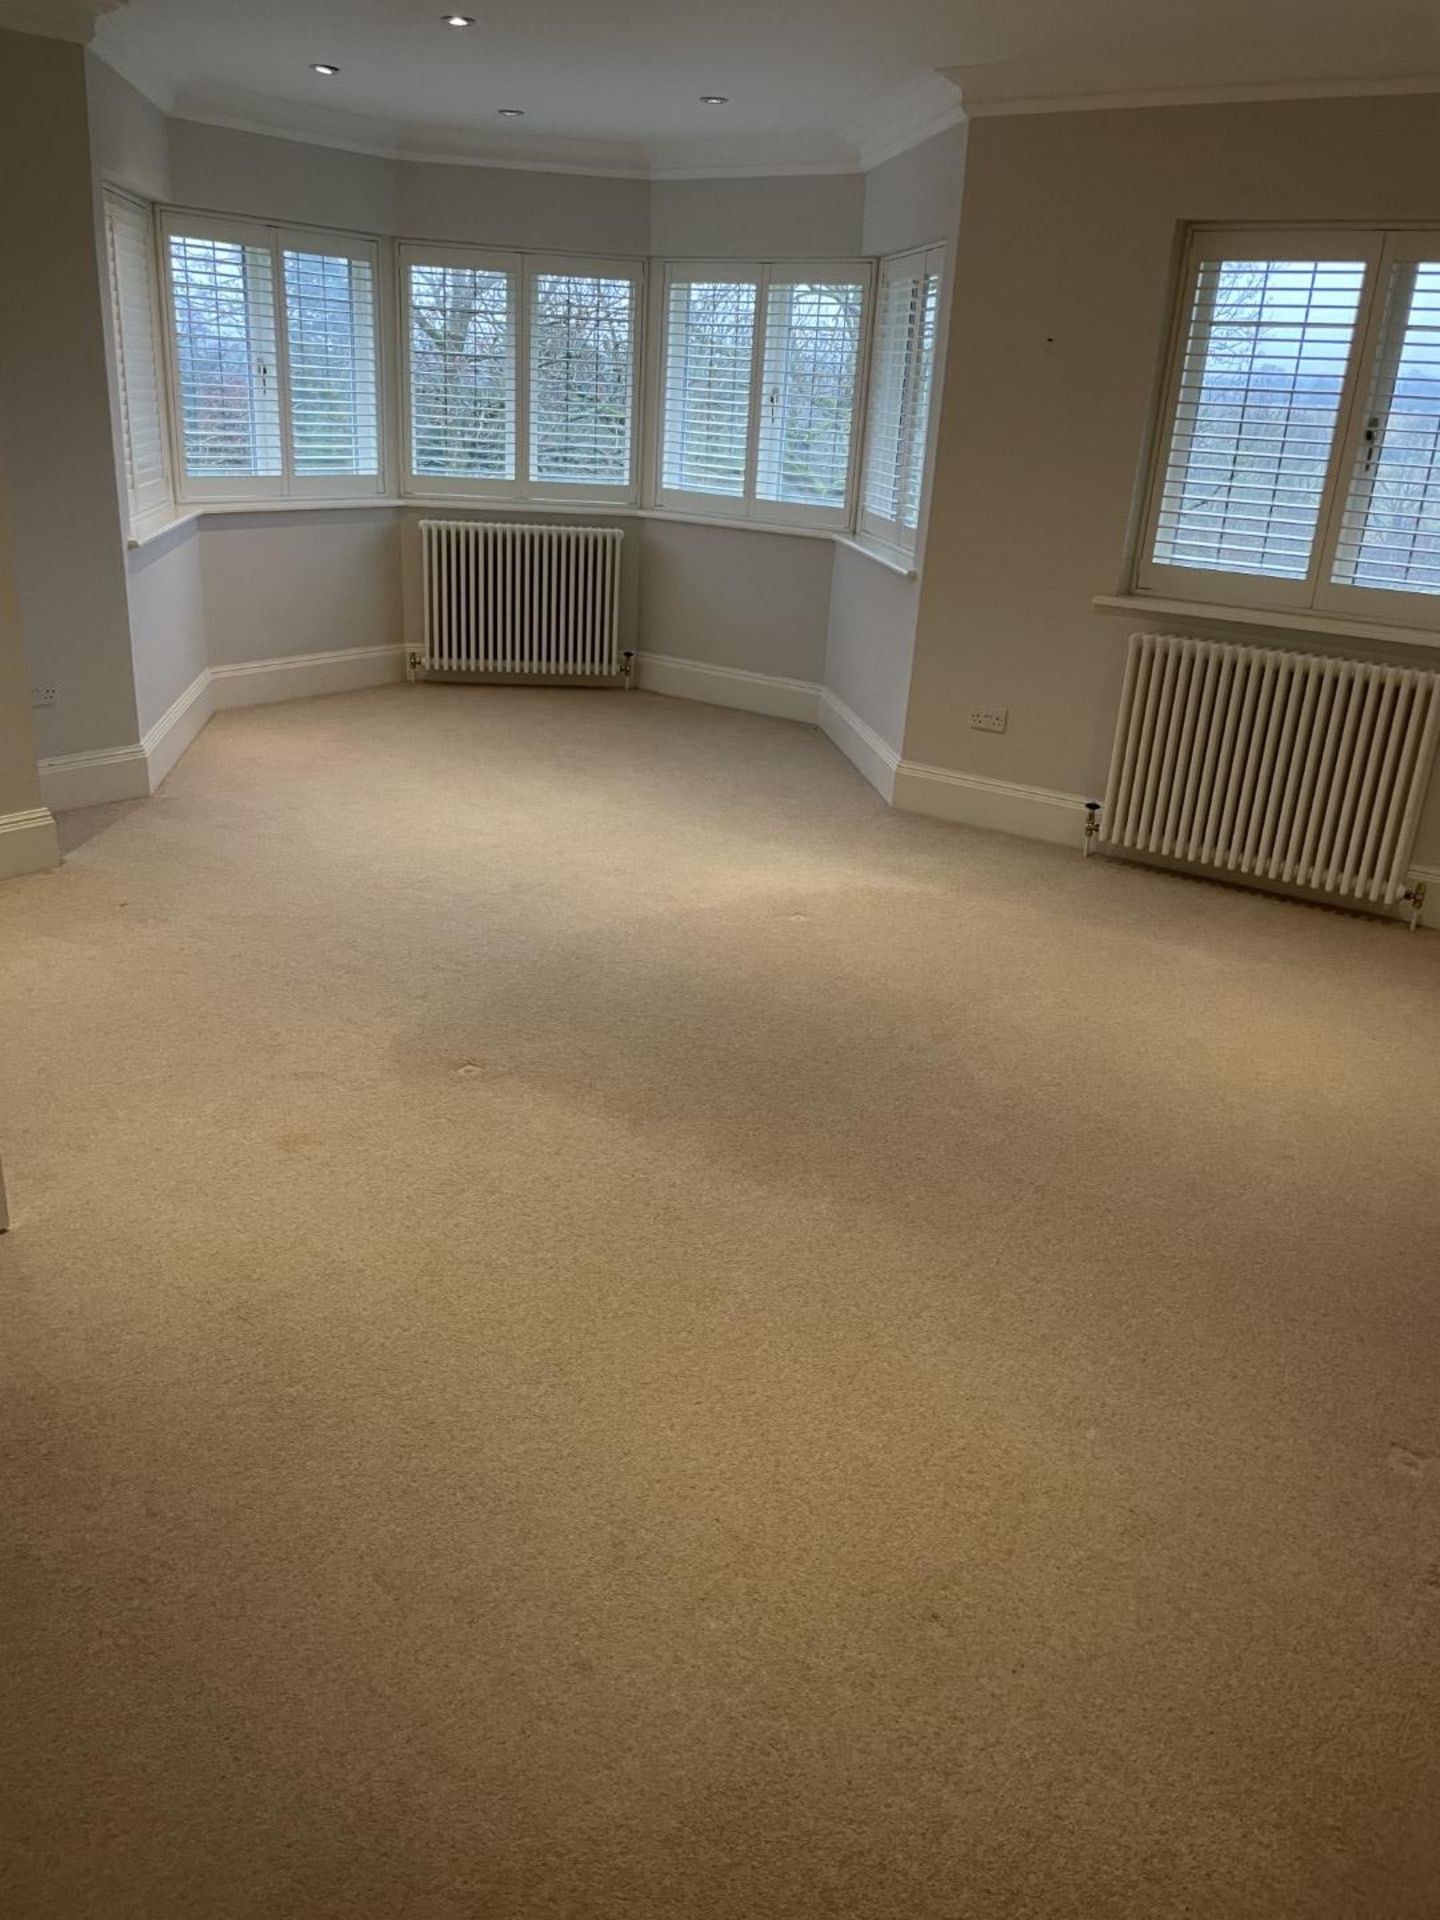 1 x Luxury Wool Back Bedroom Carpet in a Neutral Tone with Premium Underlay - Image 10 of 16